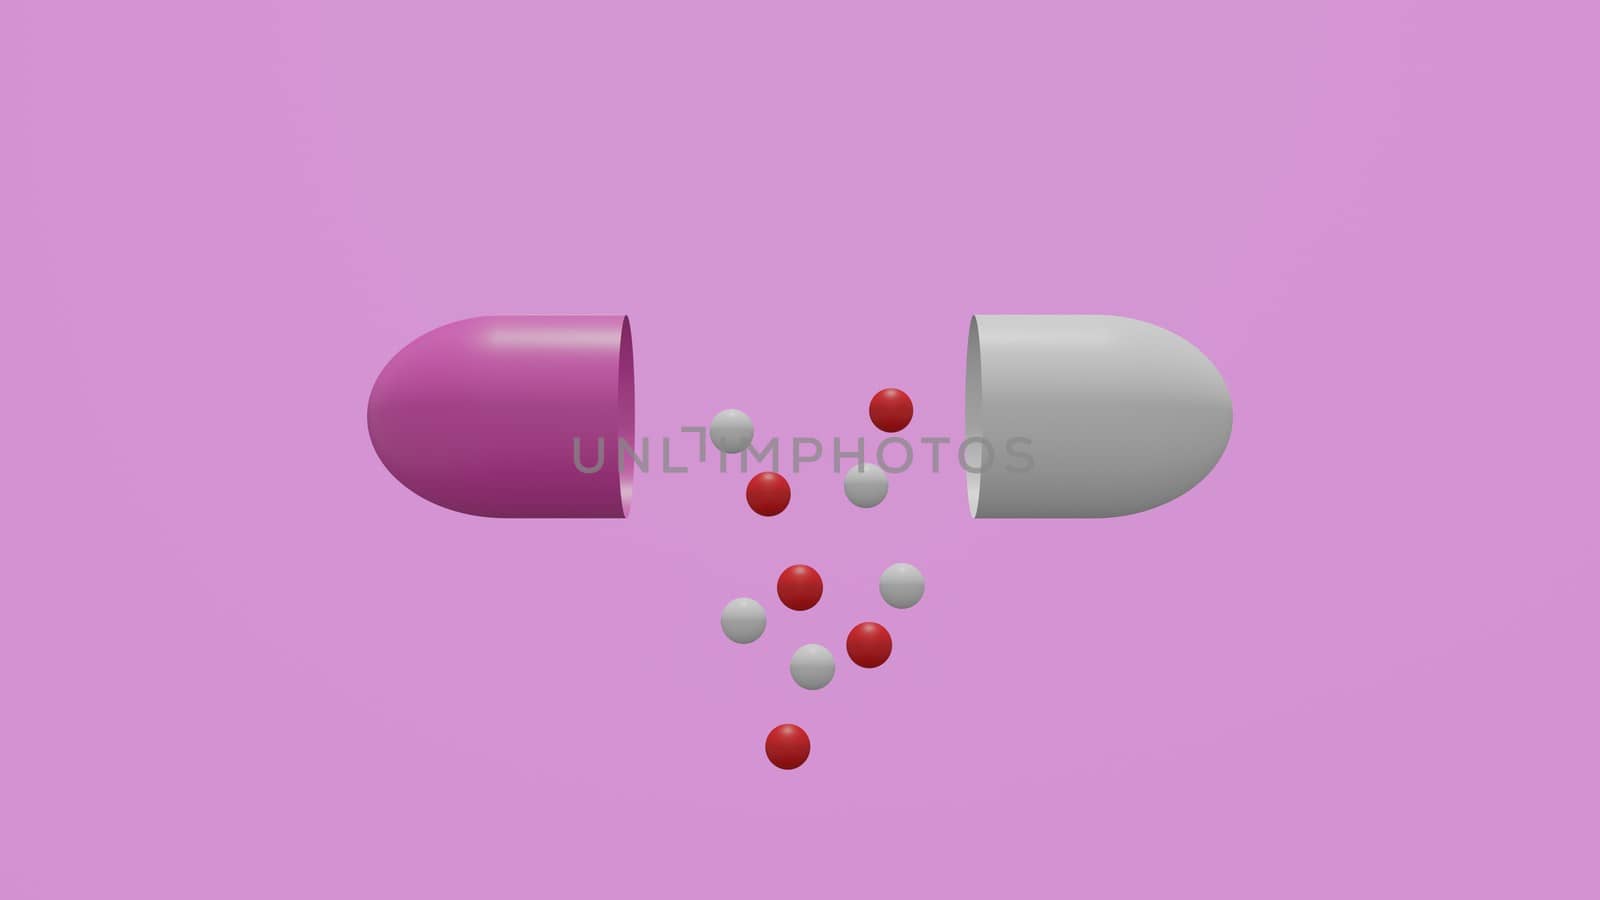 3 D rendered illustration of white and pink capsule with time release medication granules